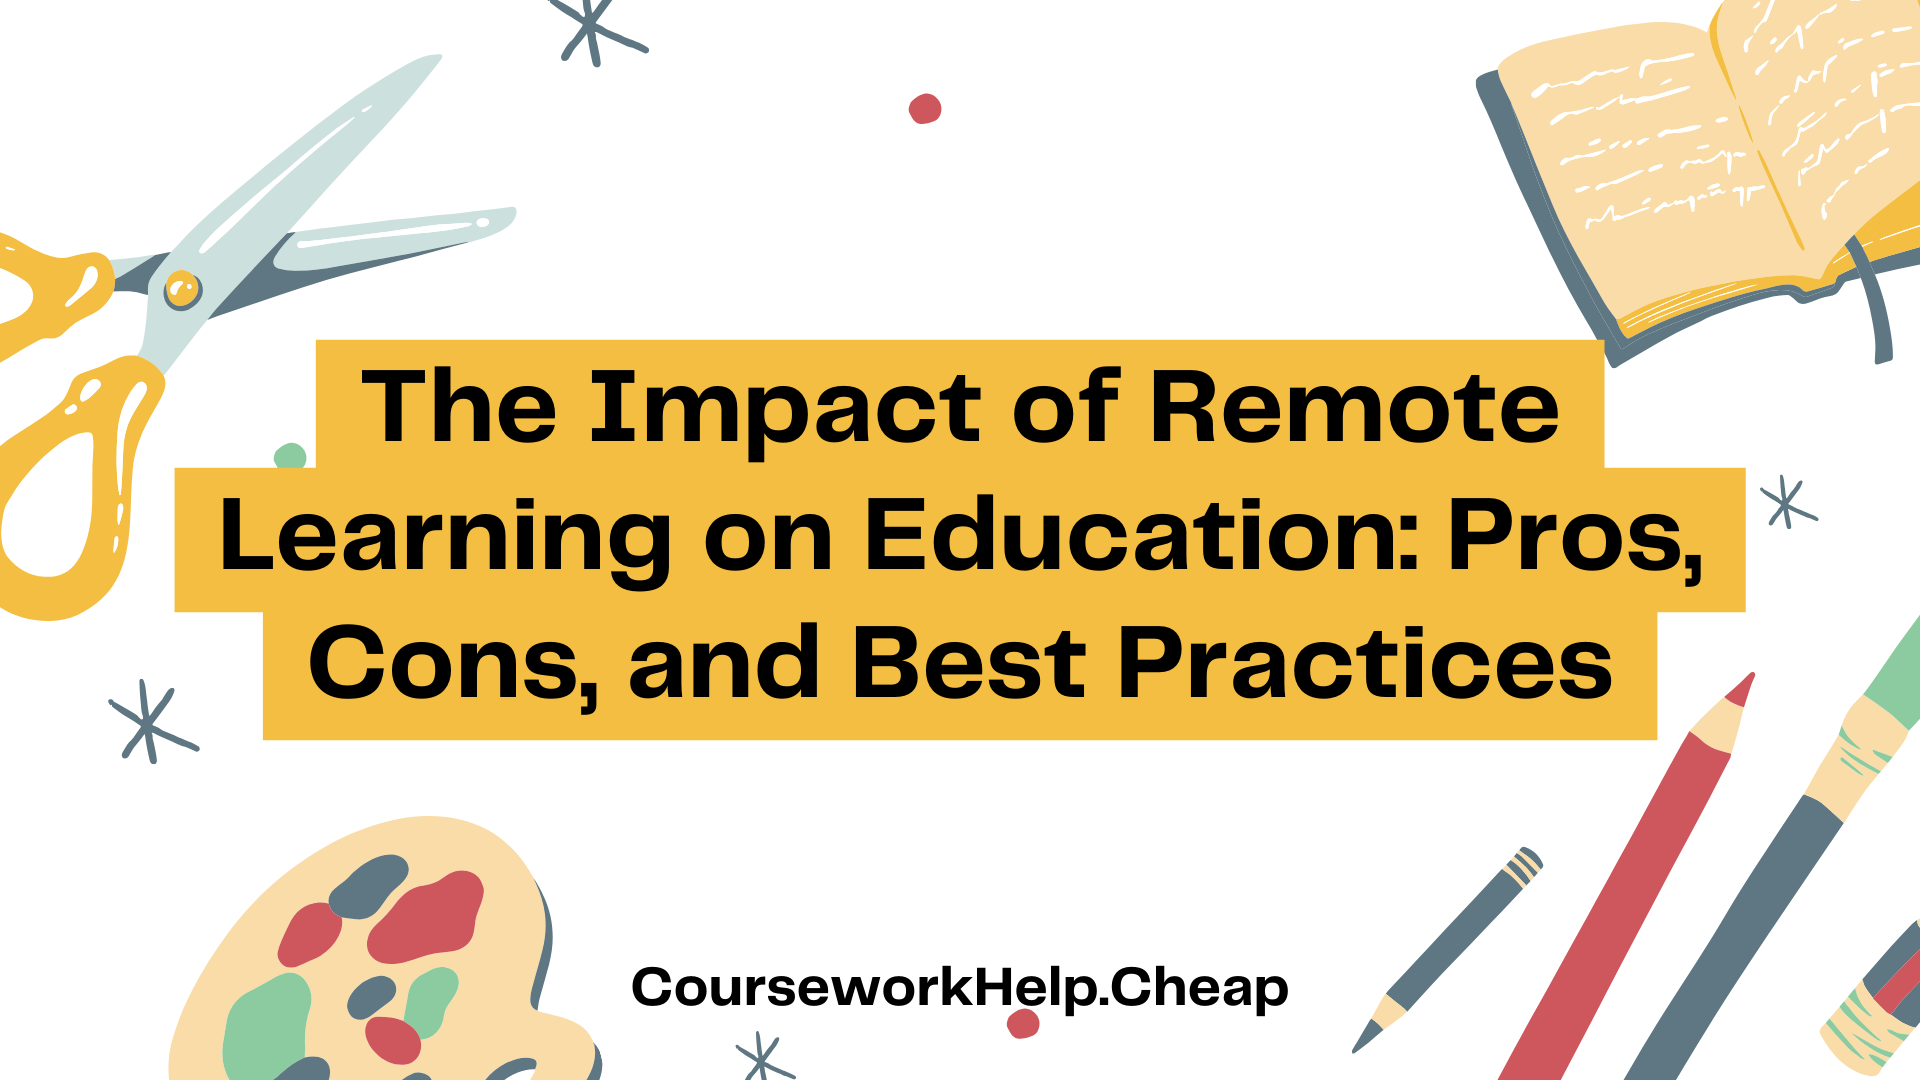 The Impact of Remote Learning on Education: Pros, Cons, and Best Practices